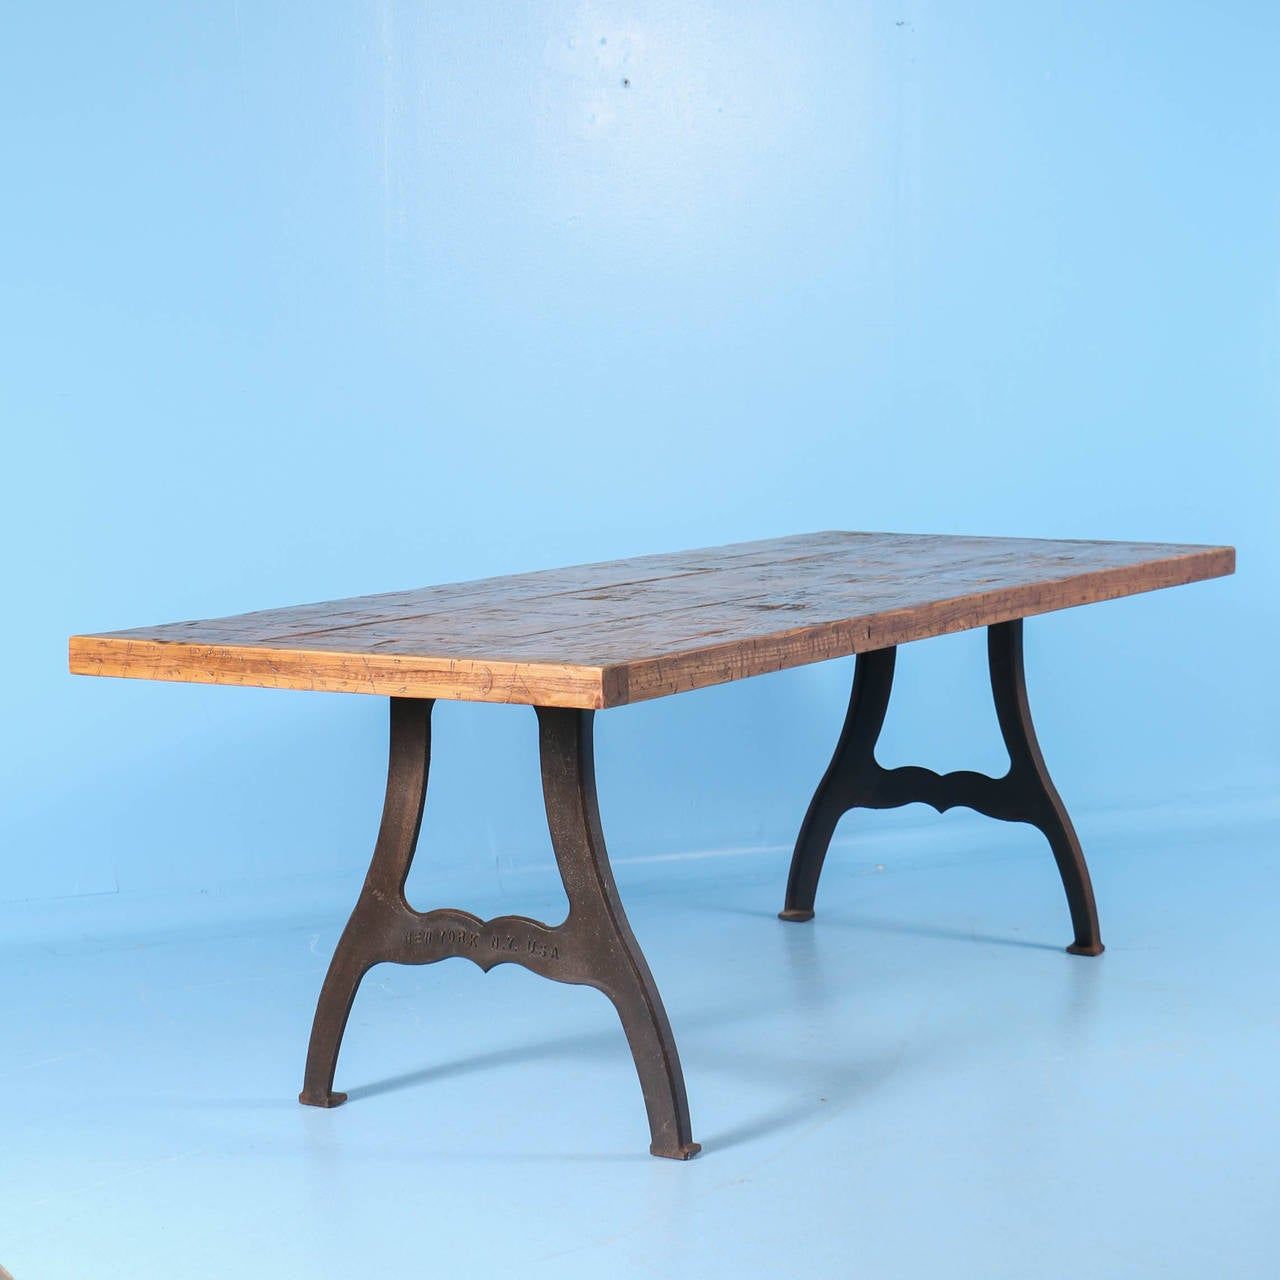 Vintage Industrial Look Dining Table From Reclaimed Wood With Regard To Best And Newest Reclaimed Teak And Cast Iron Round Dining Tables (View 9 of 15)